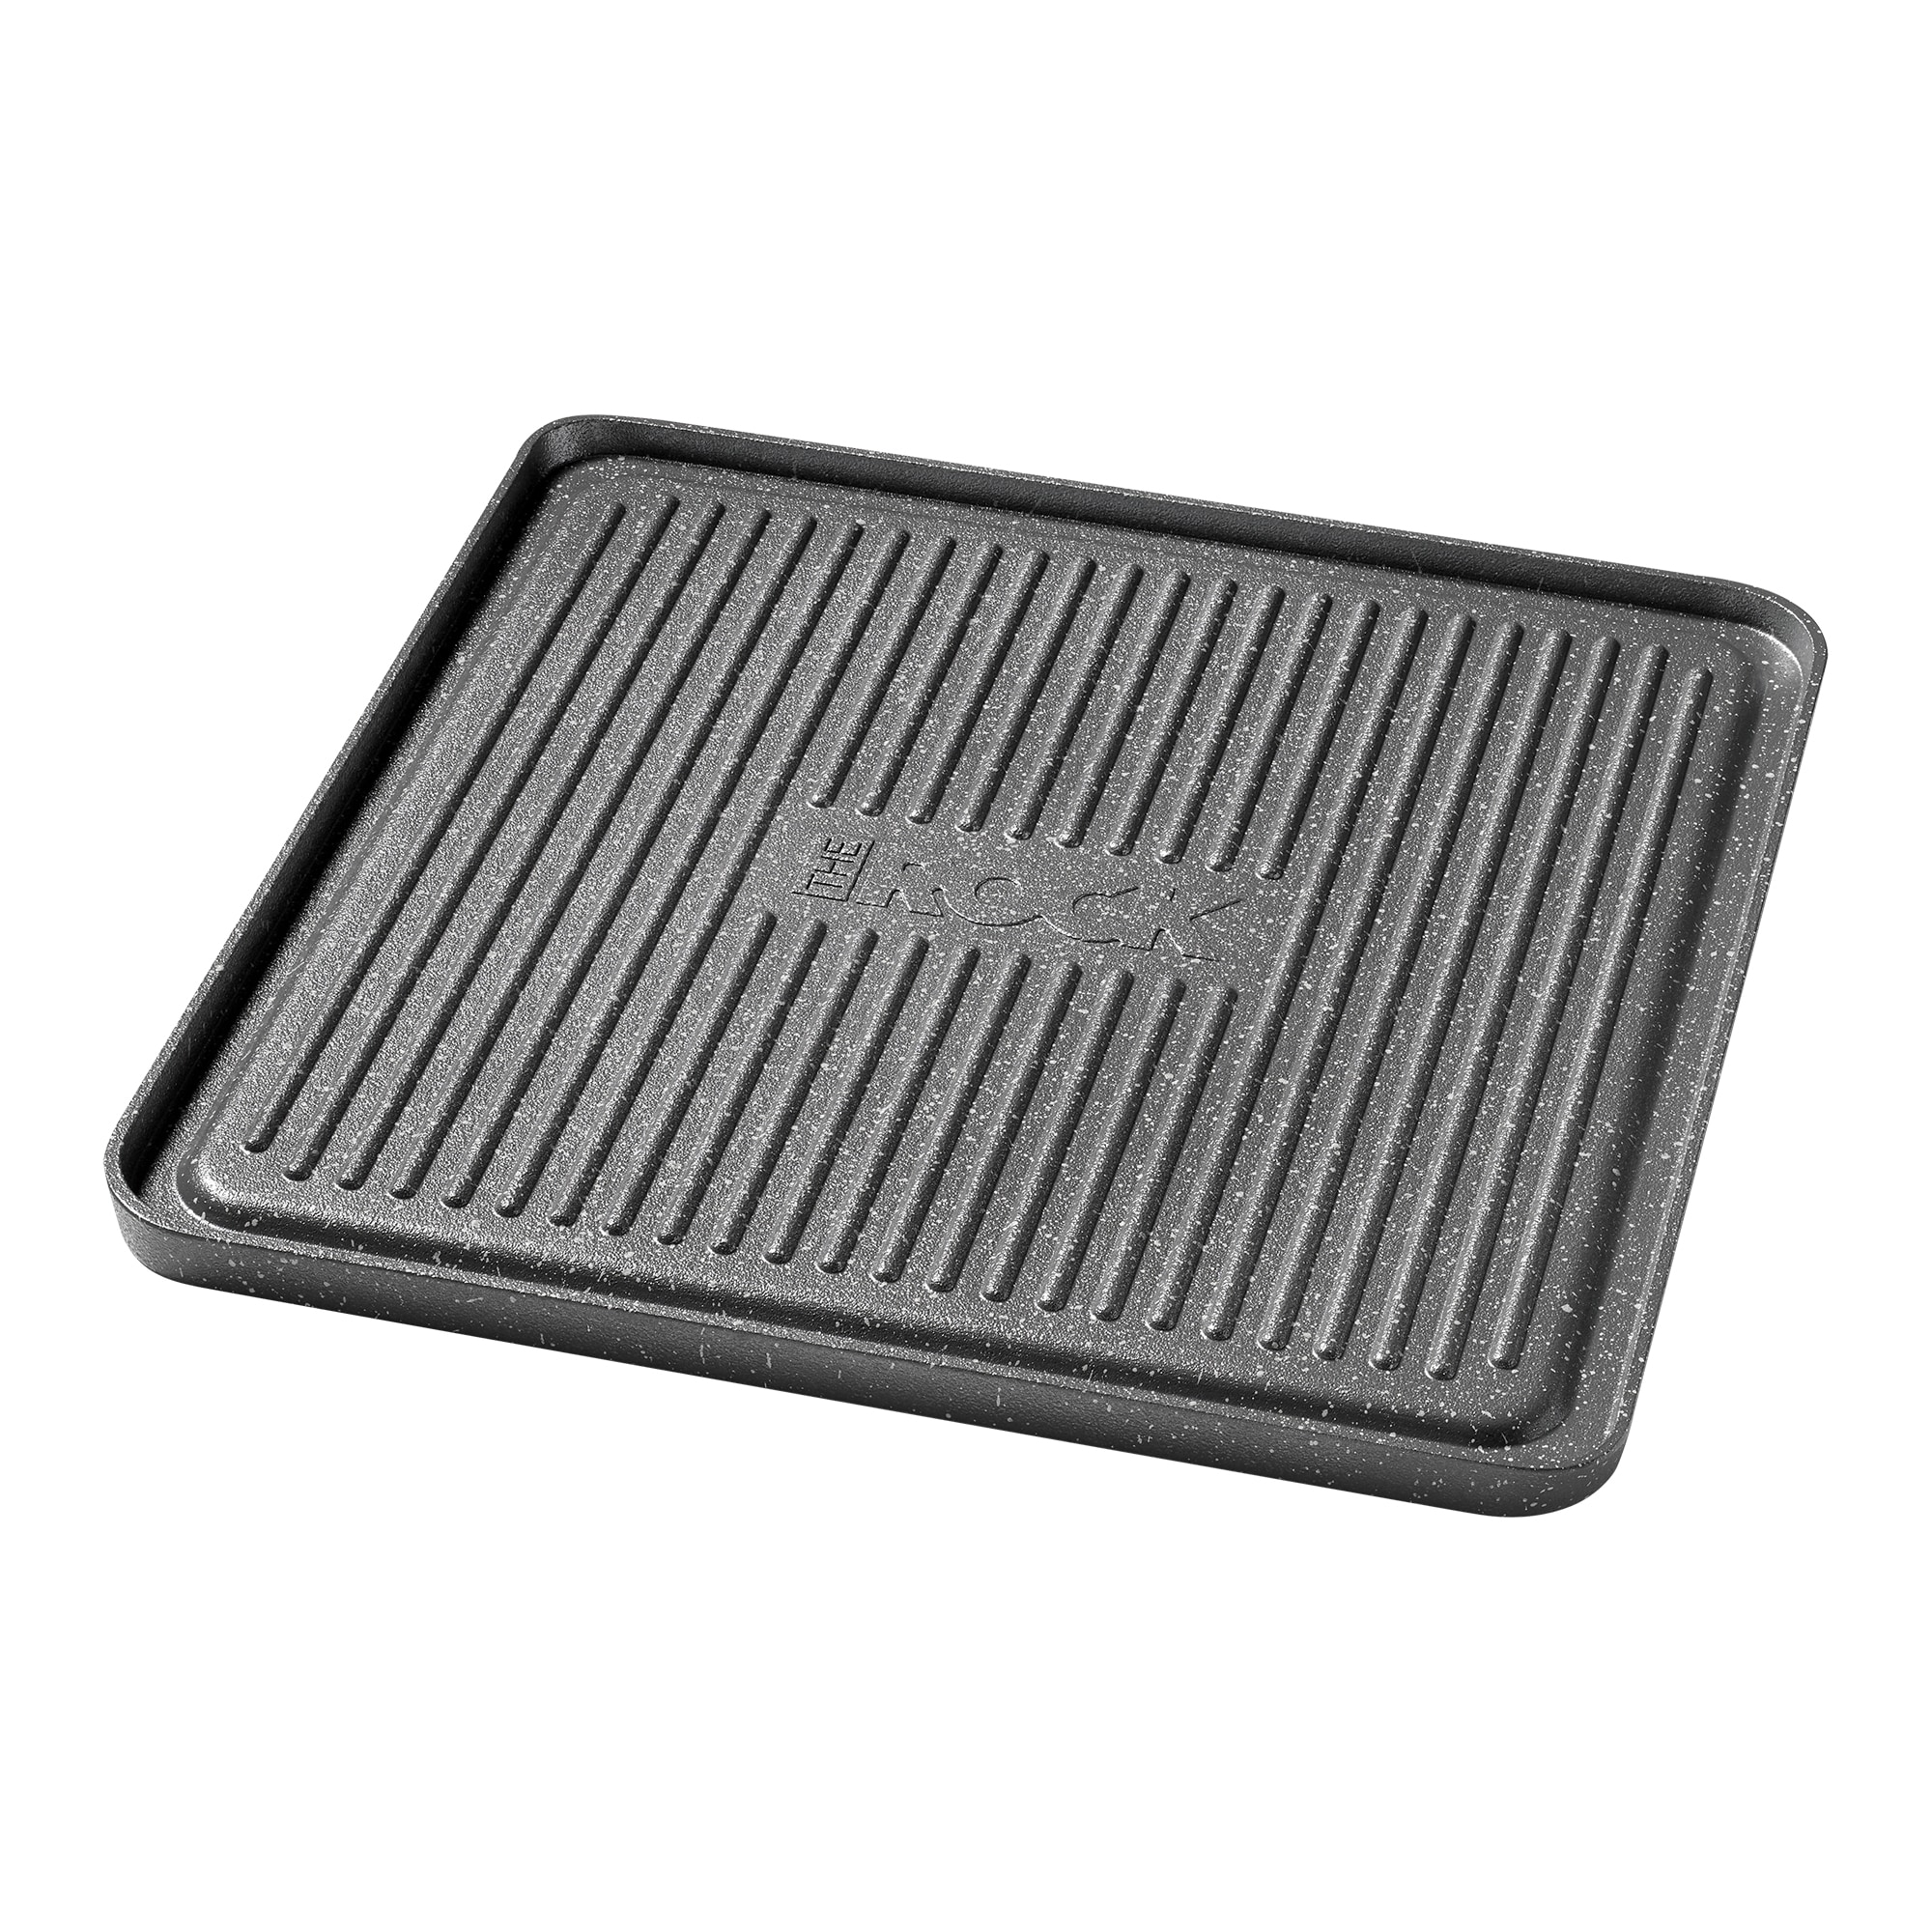 Starfrit The Rock Reversible Grill/Griddle - Silver, 1 ct - Mariano's